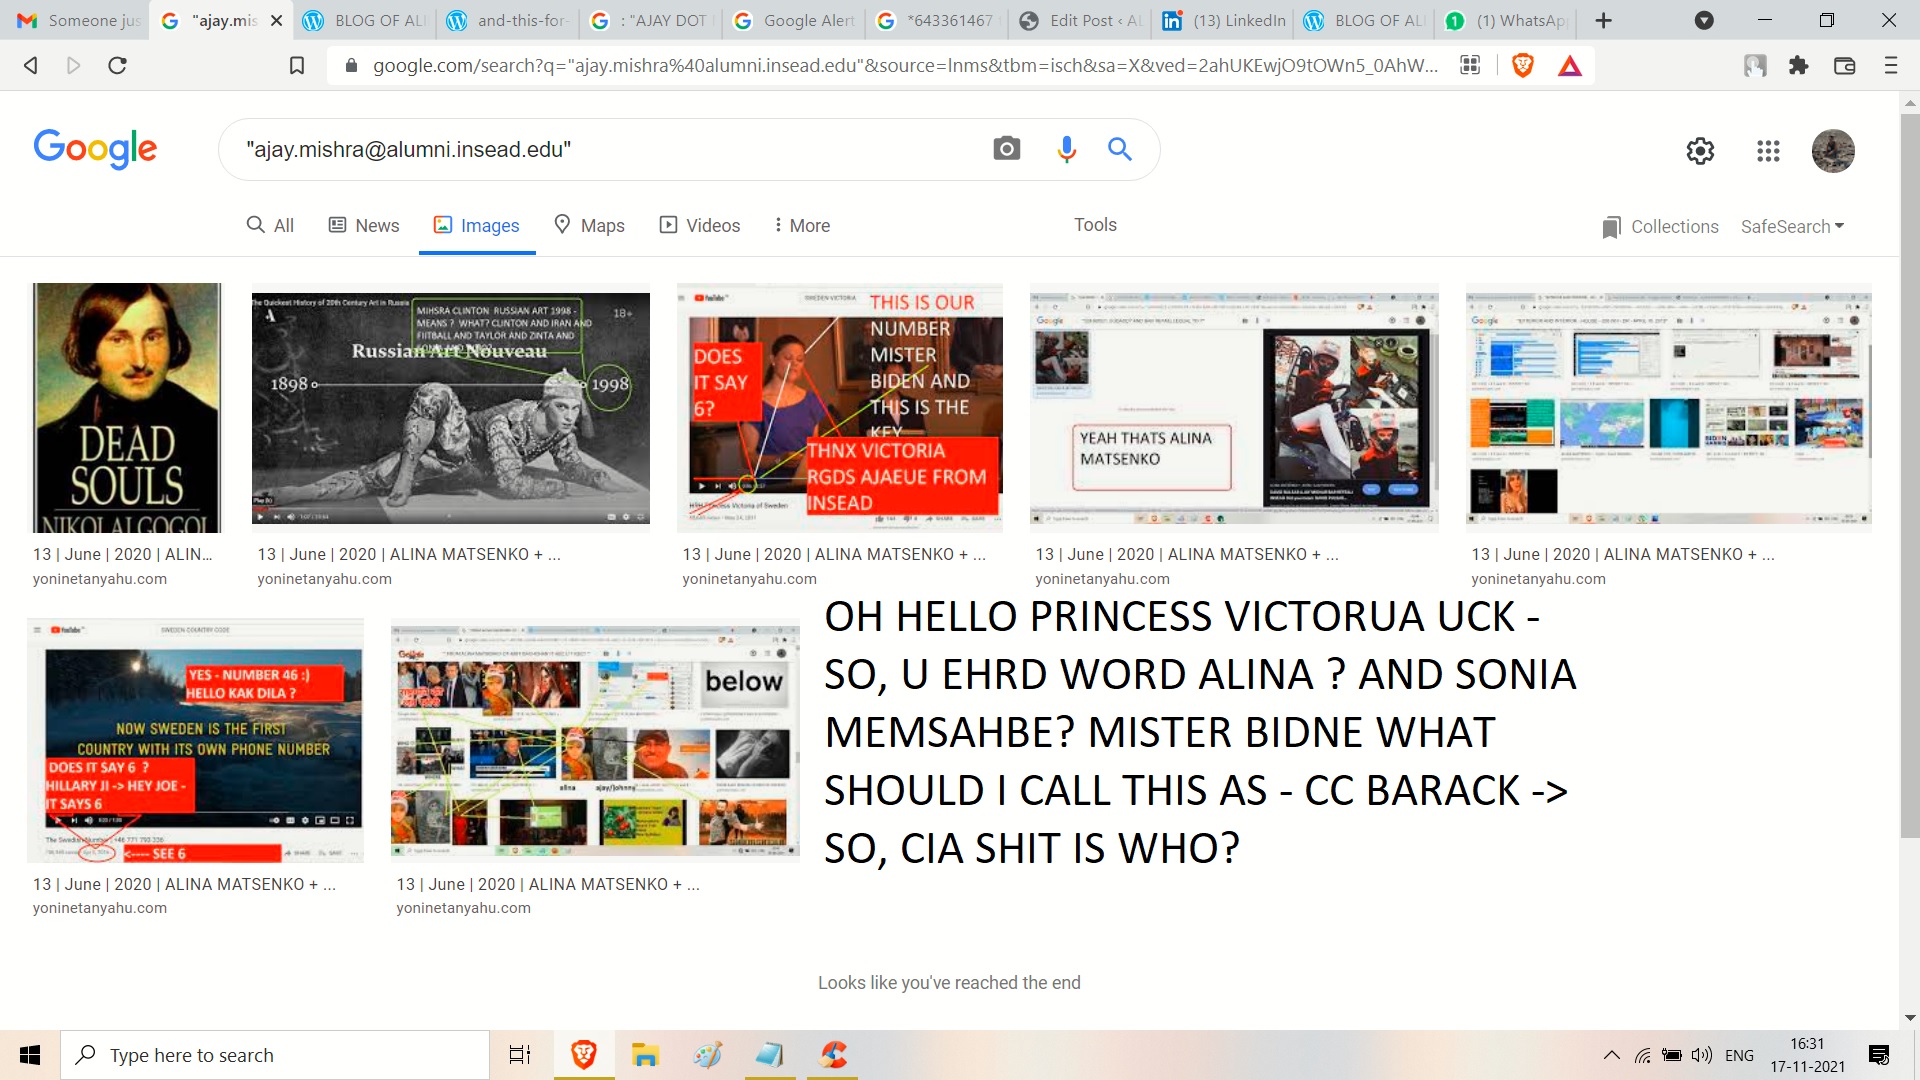 PIRNCESS HOW R U SO THIS IS MY EMAIL ALINA OK SO NOW, DID ME SAY - I EMNA U KNOW